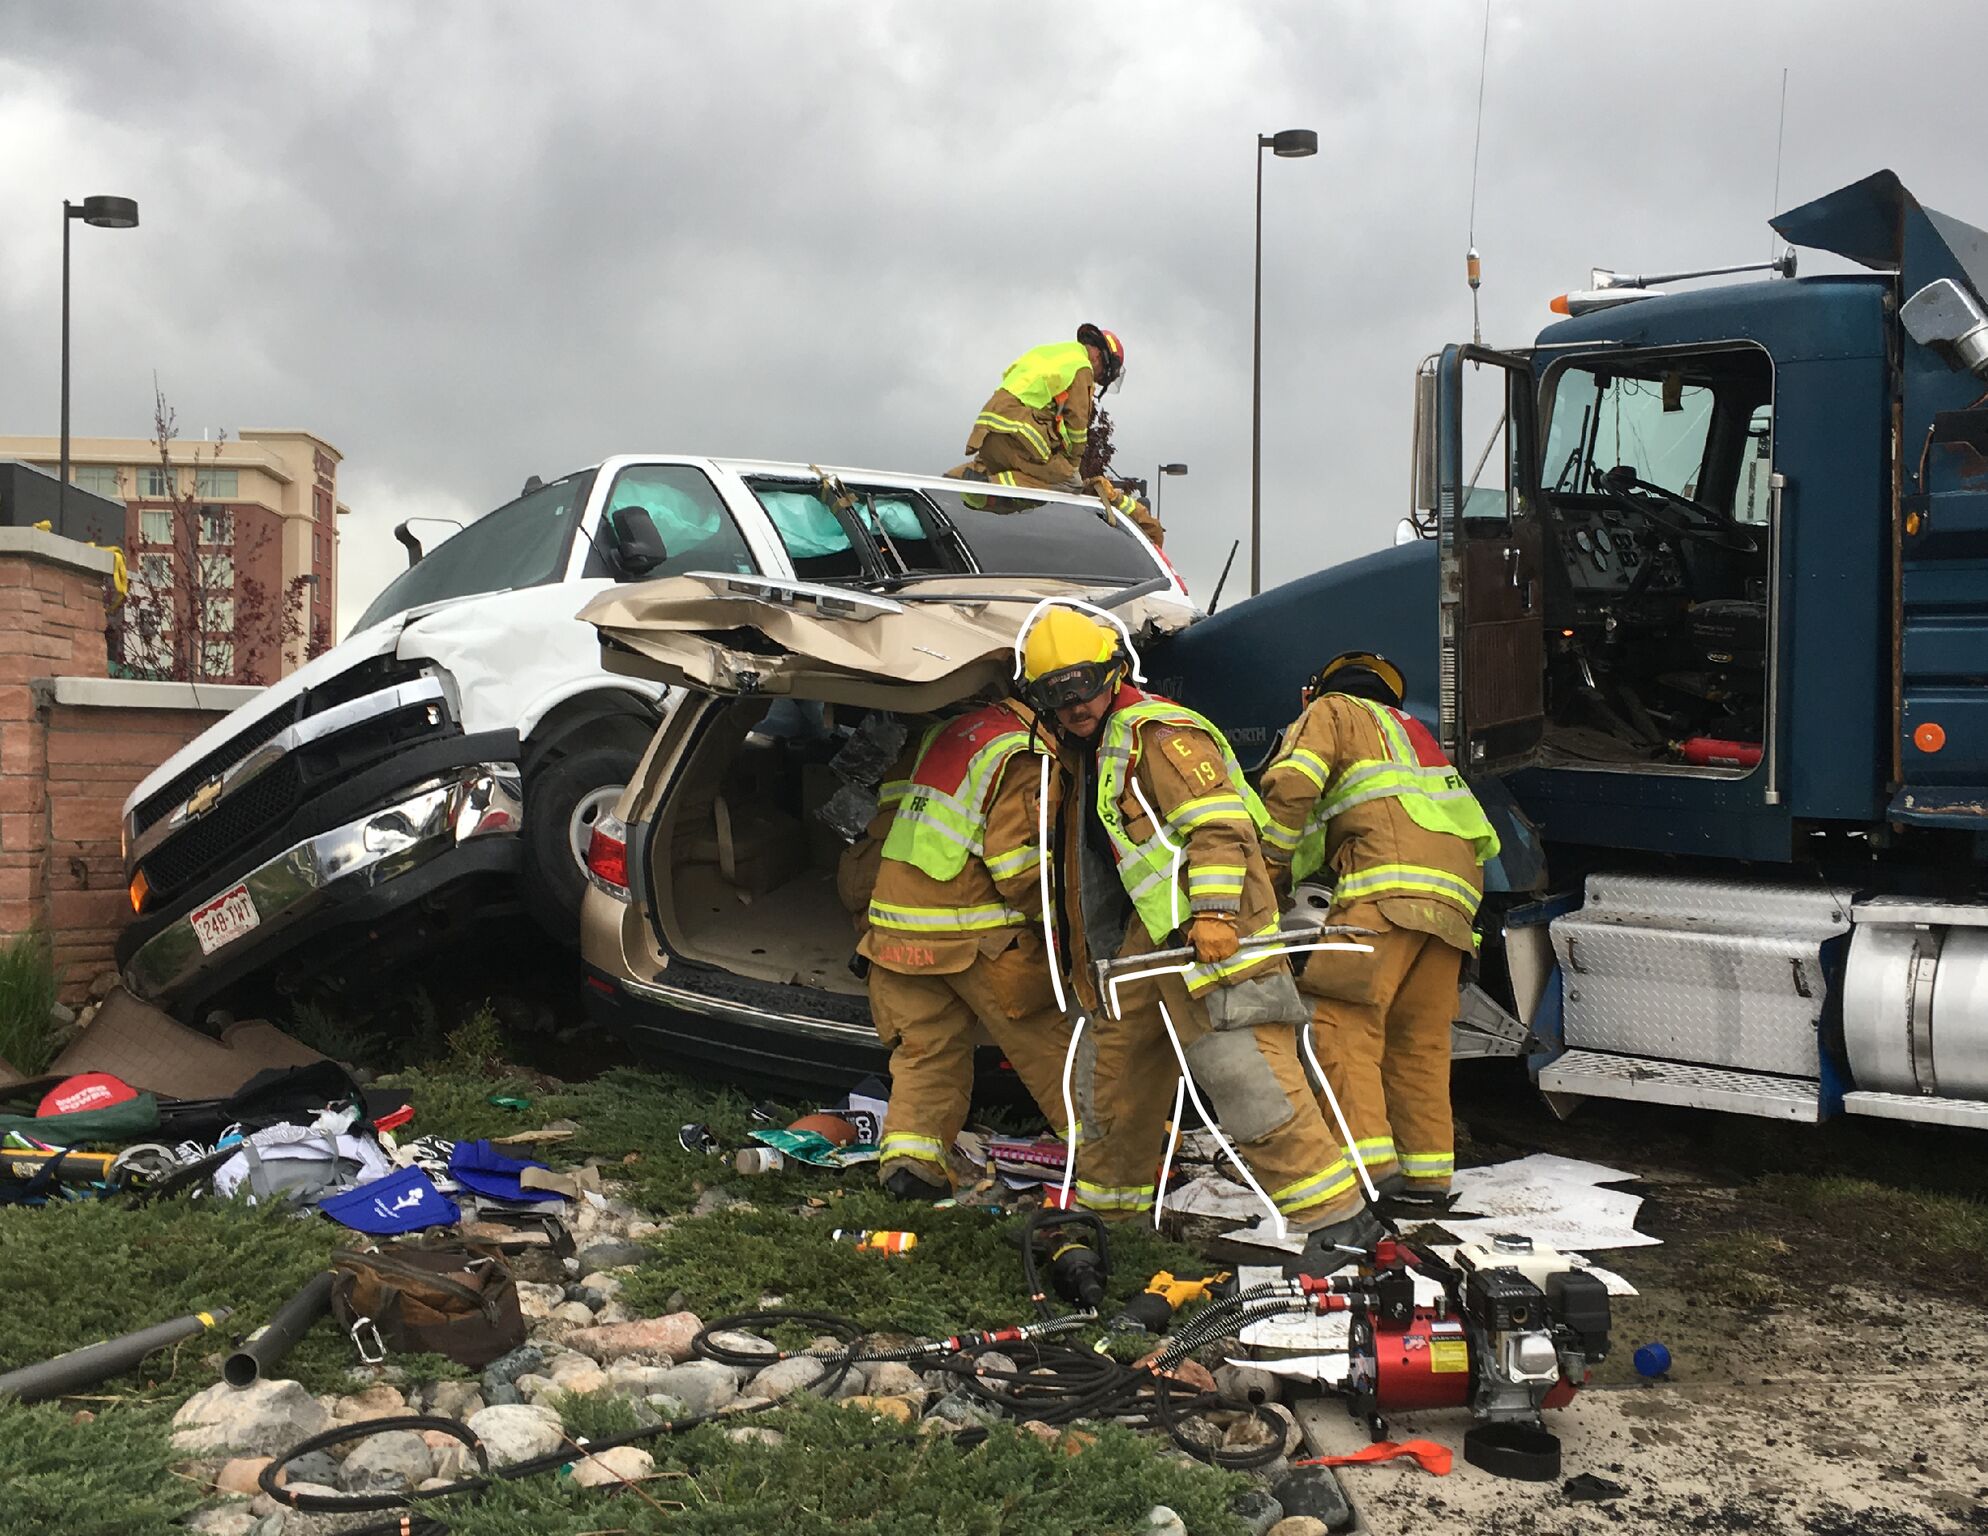 Firefighters work the scene of an accident near Colorado Springs. The city's fire chief, Ted Collas, says the public safety initiative has given first responders from different agencies the opportunity to learn from each other to better serve their communities. (Photo courtesy of Colorado Springs Fire Department)